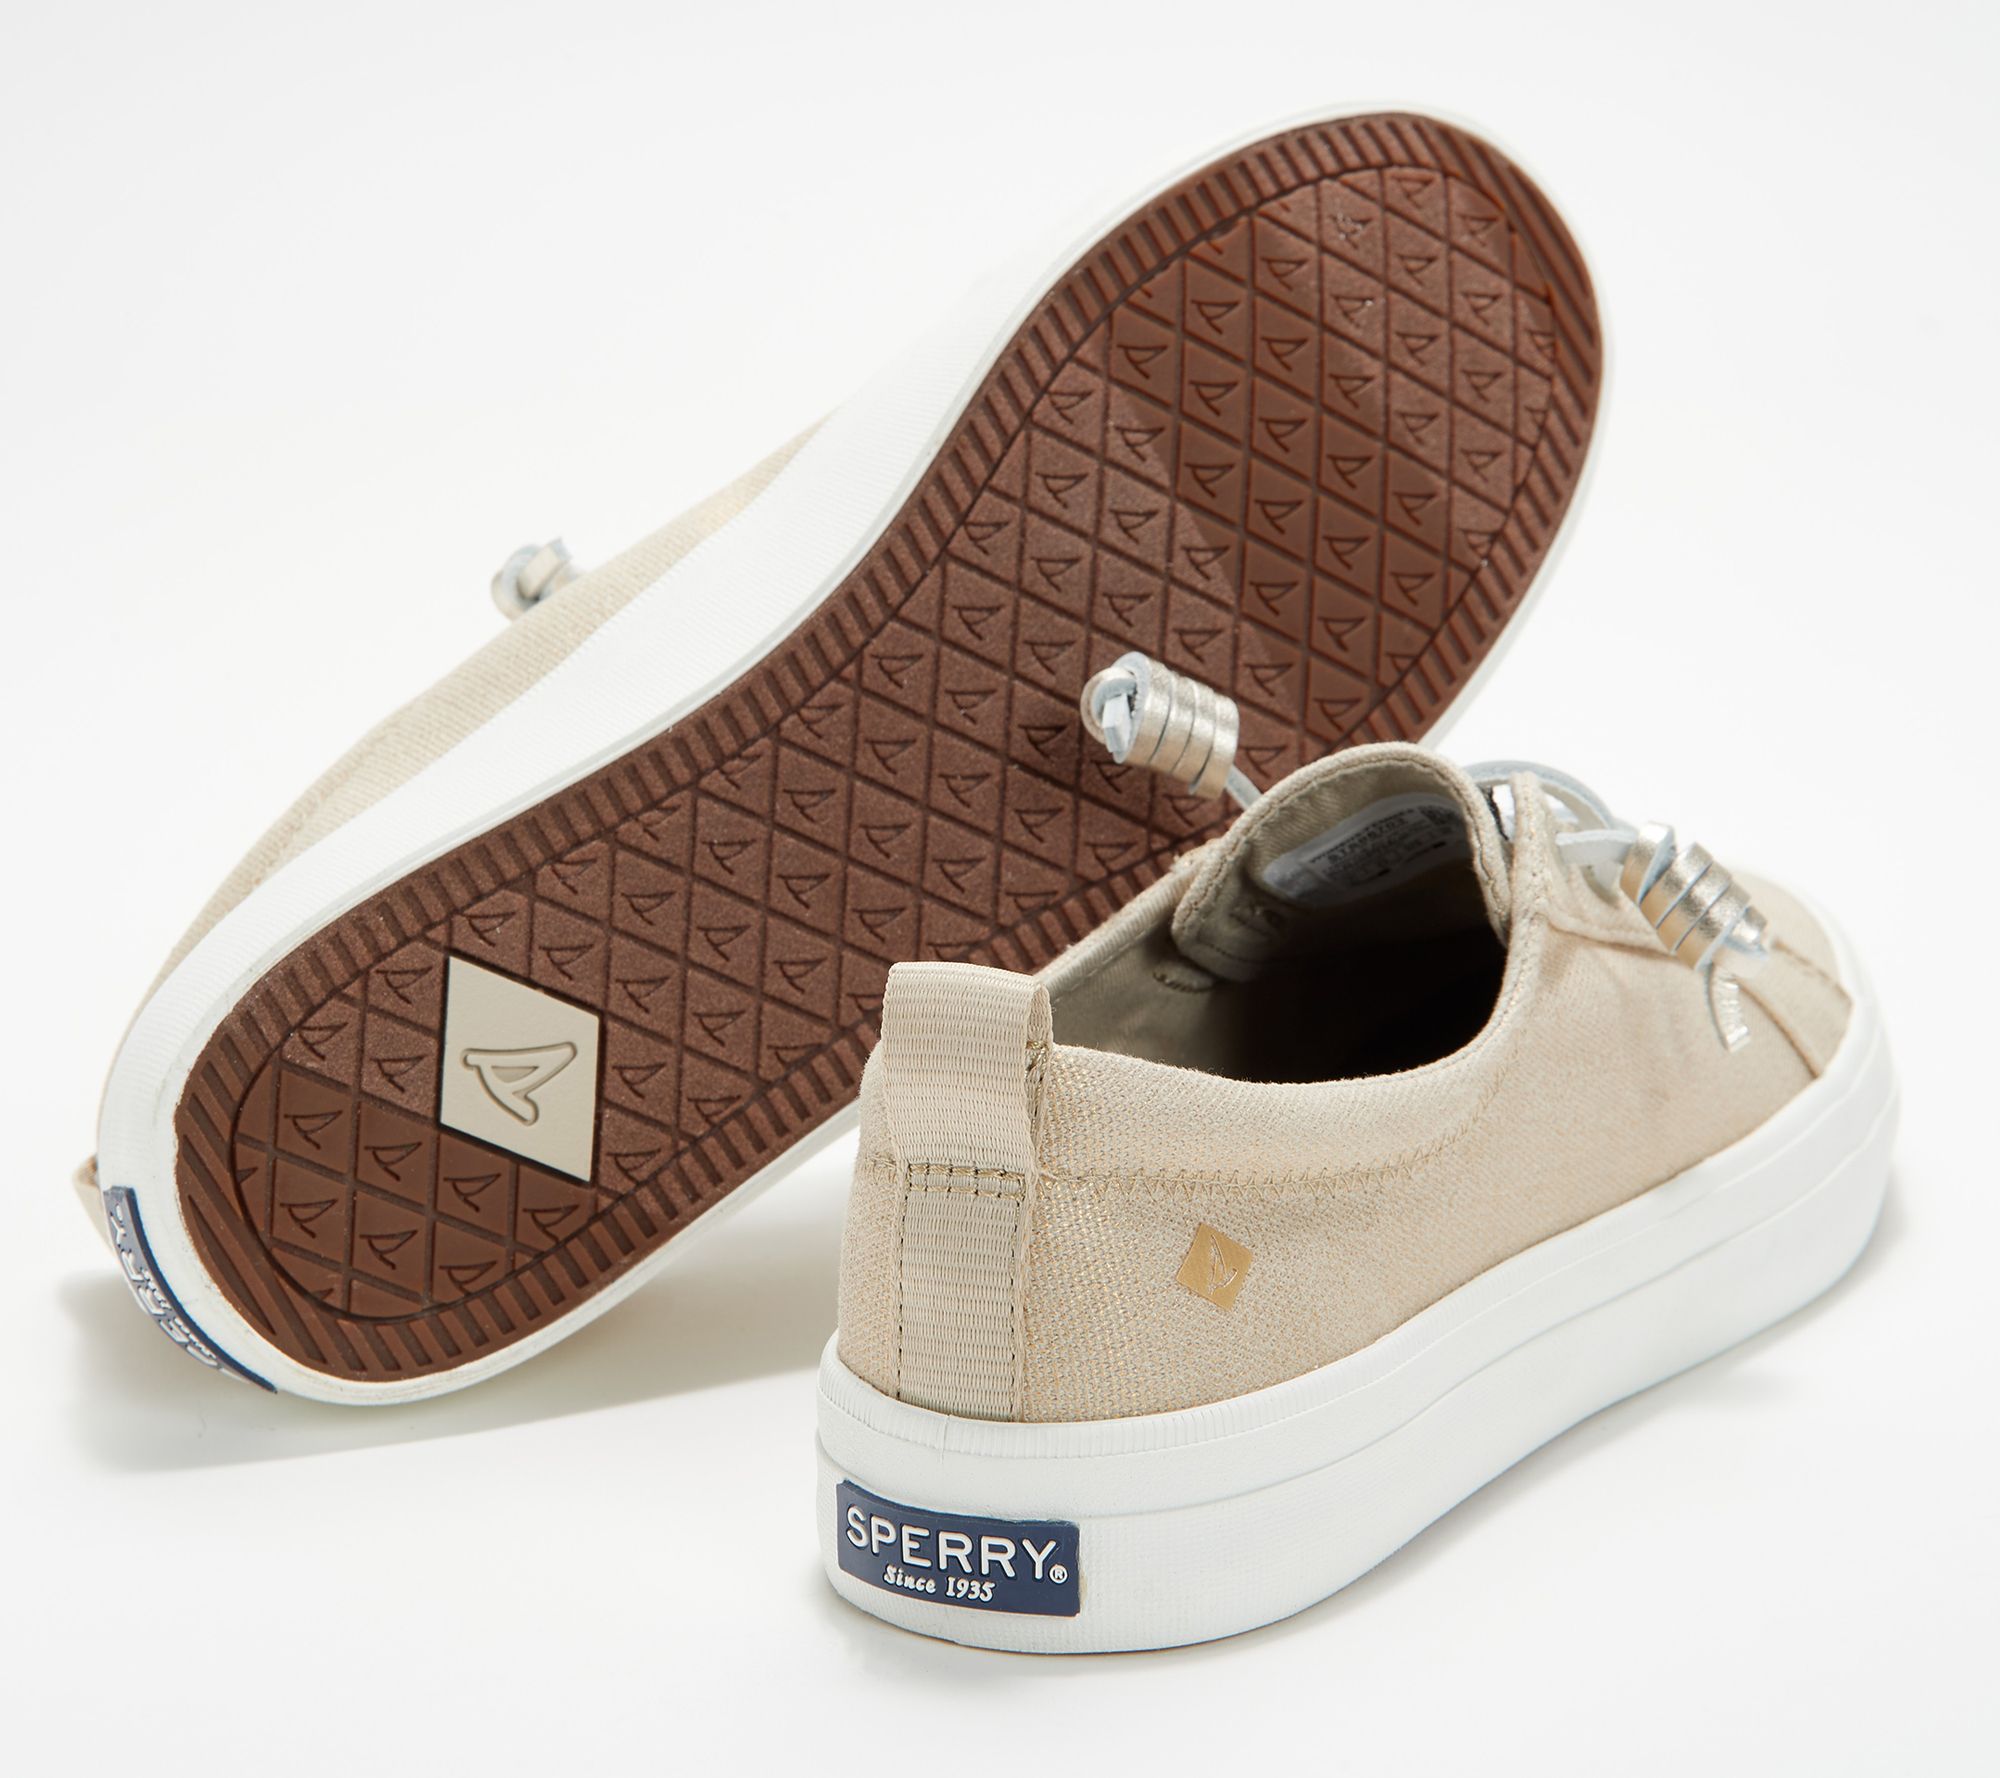 Sperry Crest Vibe Sparkle Sneakers - QVC.com